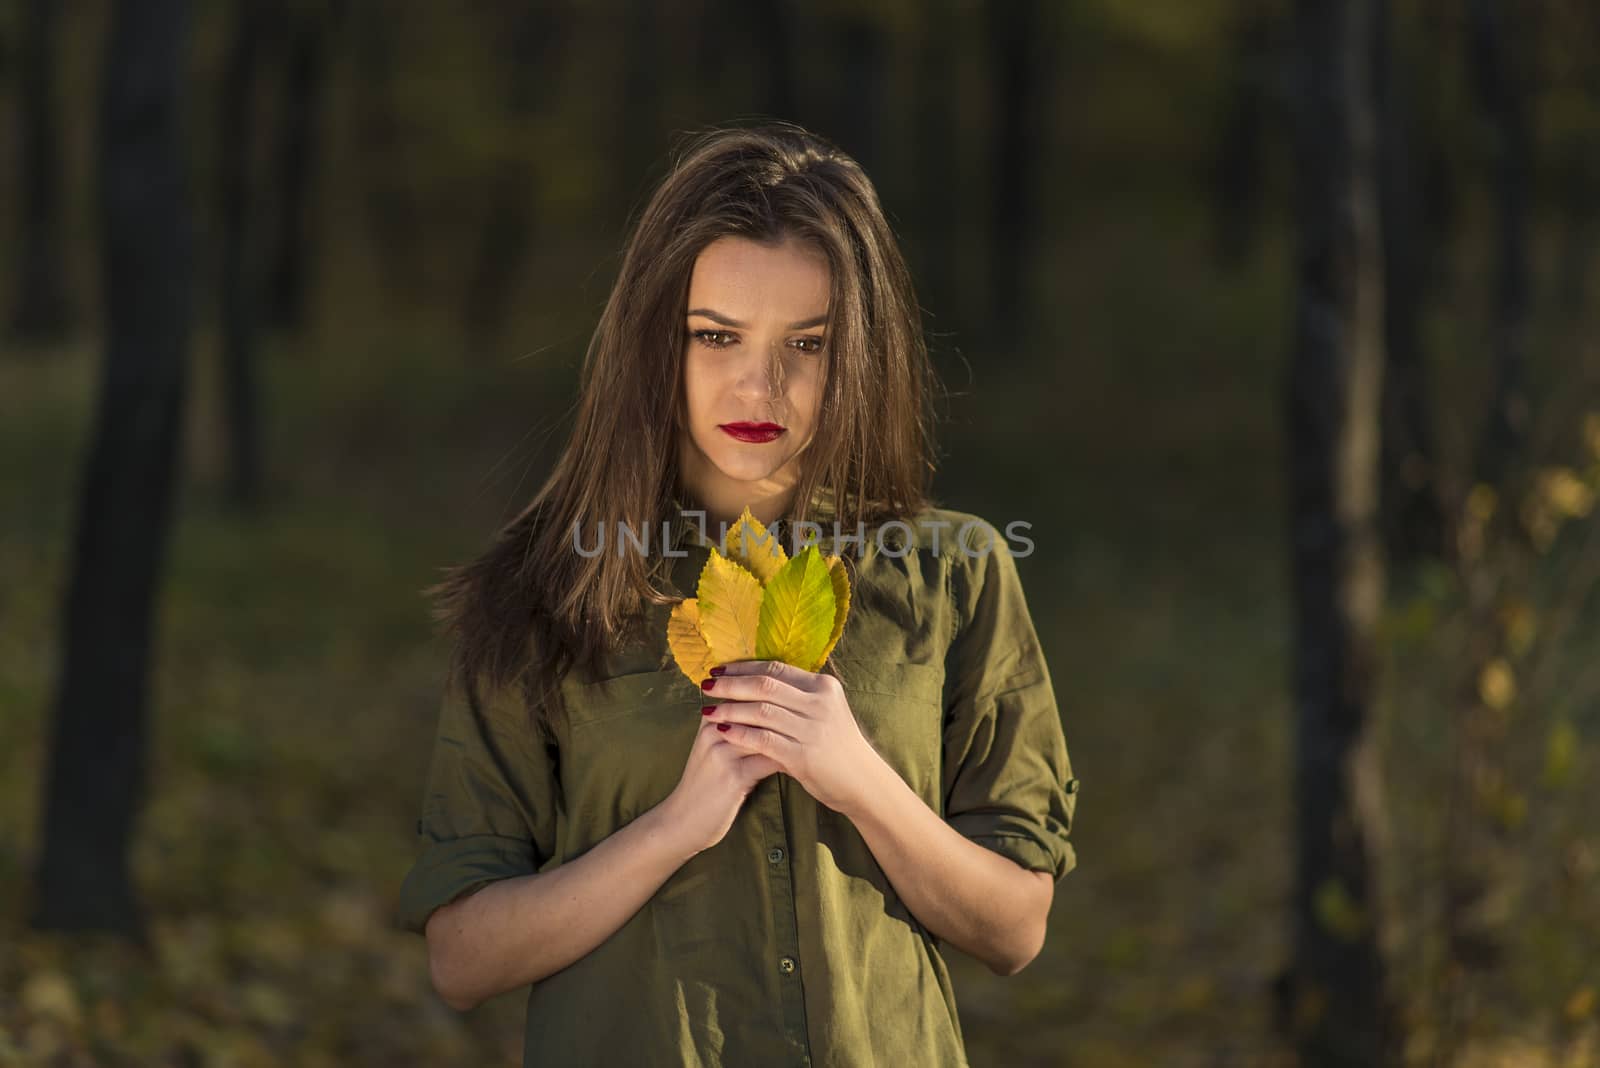 Pensive autumn look. A meditative teenage girl is looking down in a autumn forest while holding yellow leaves in her hands.